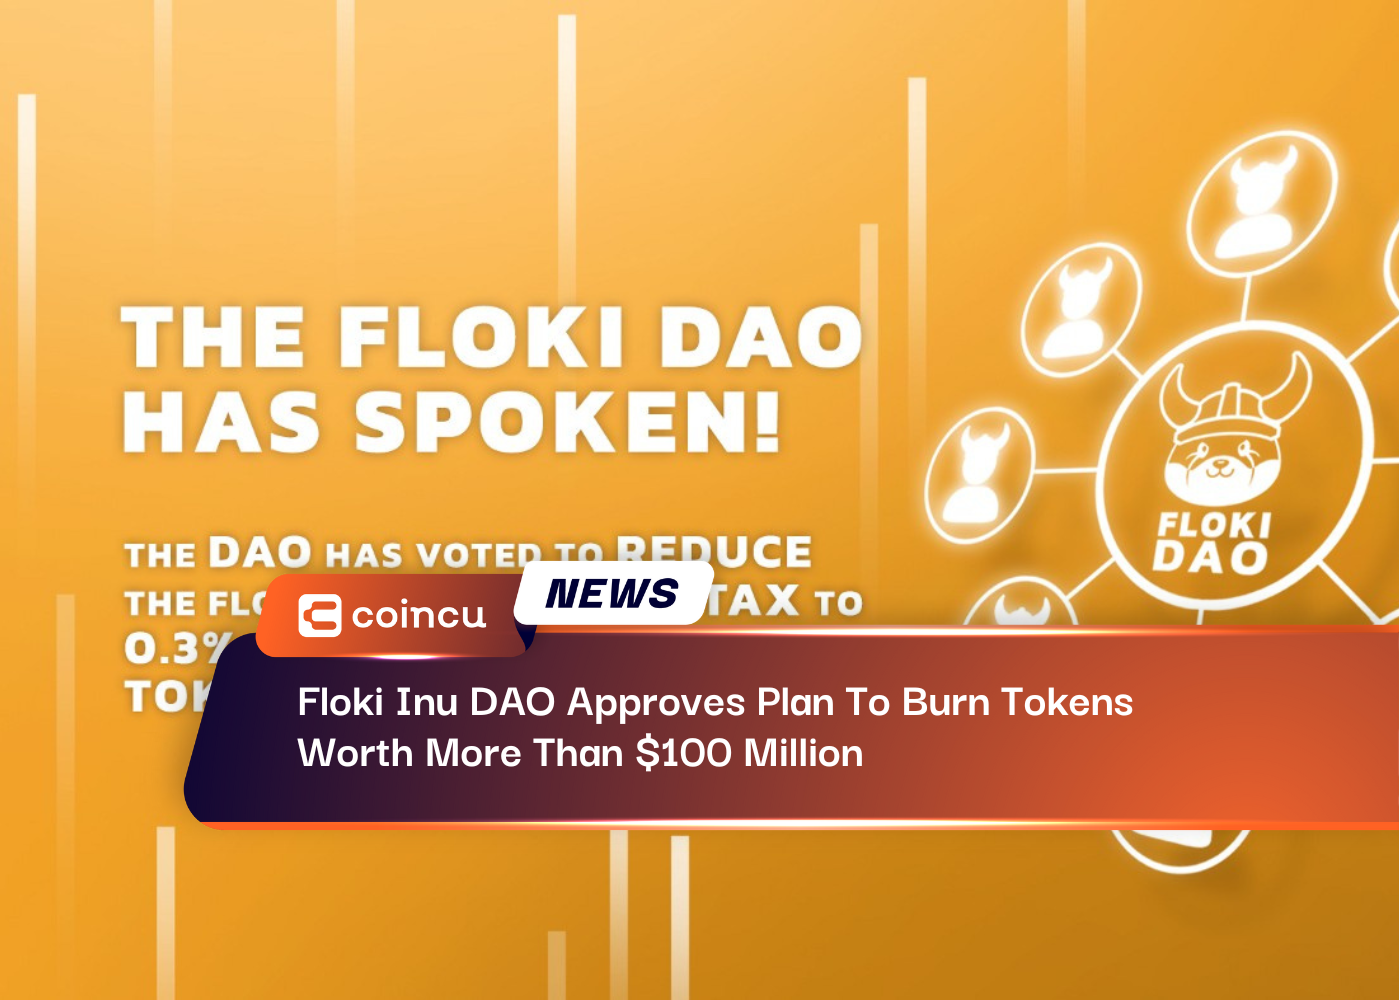 Floki Inu DAO Approves Plan To Burn Tokens